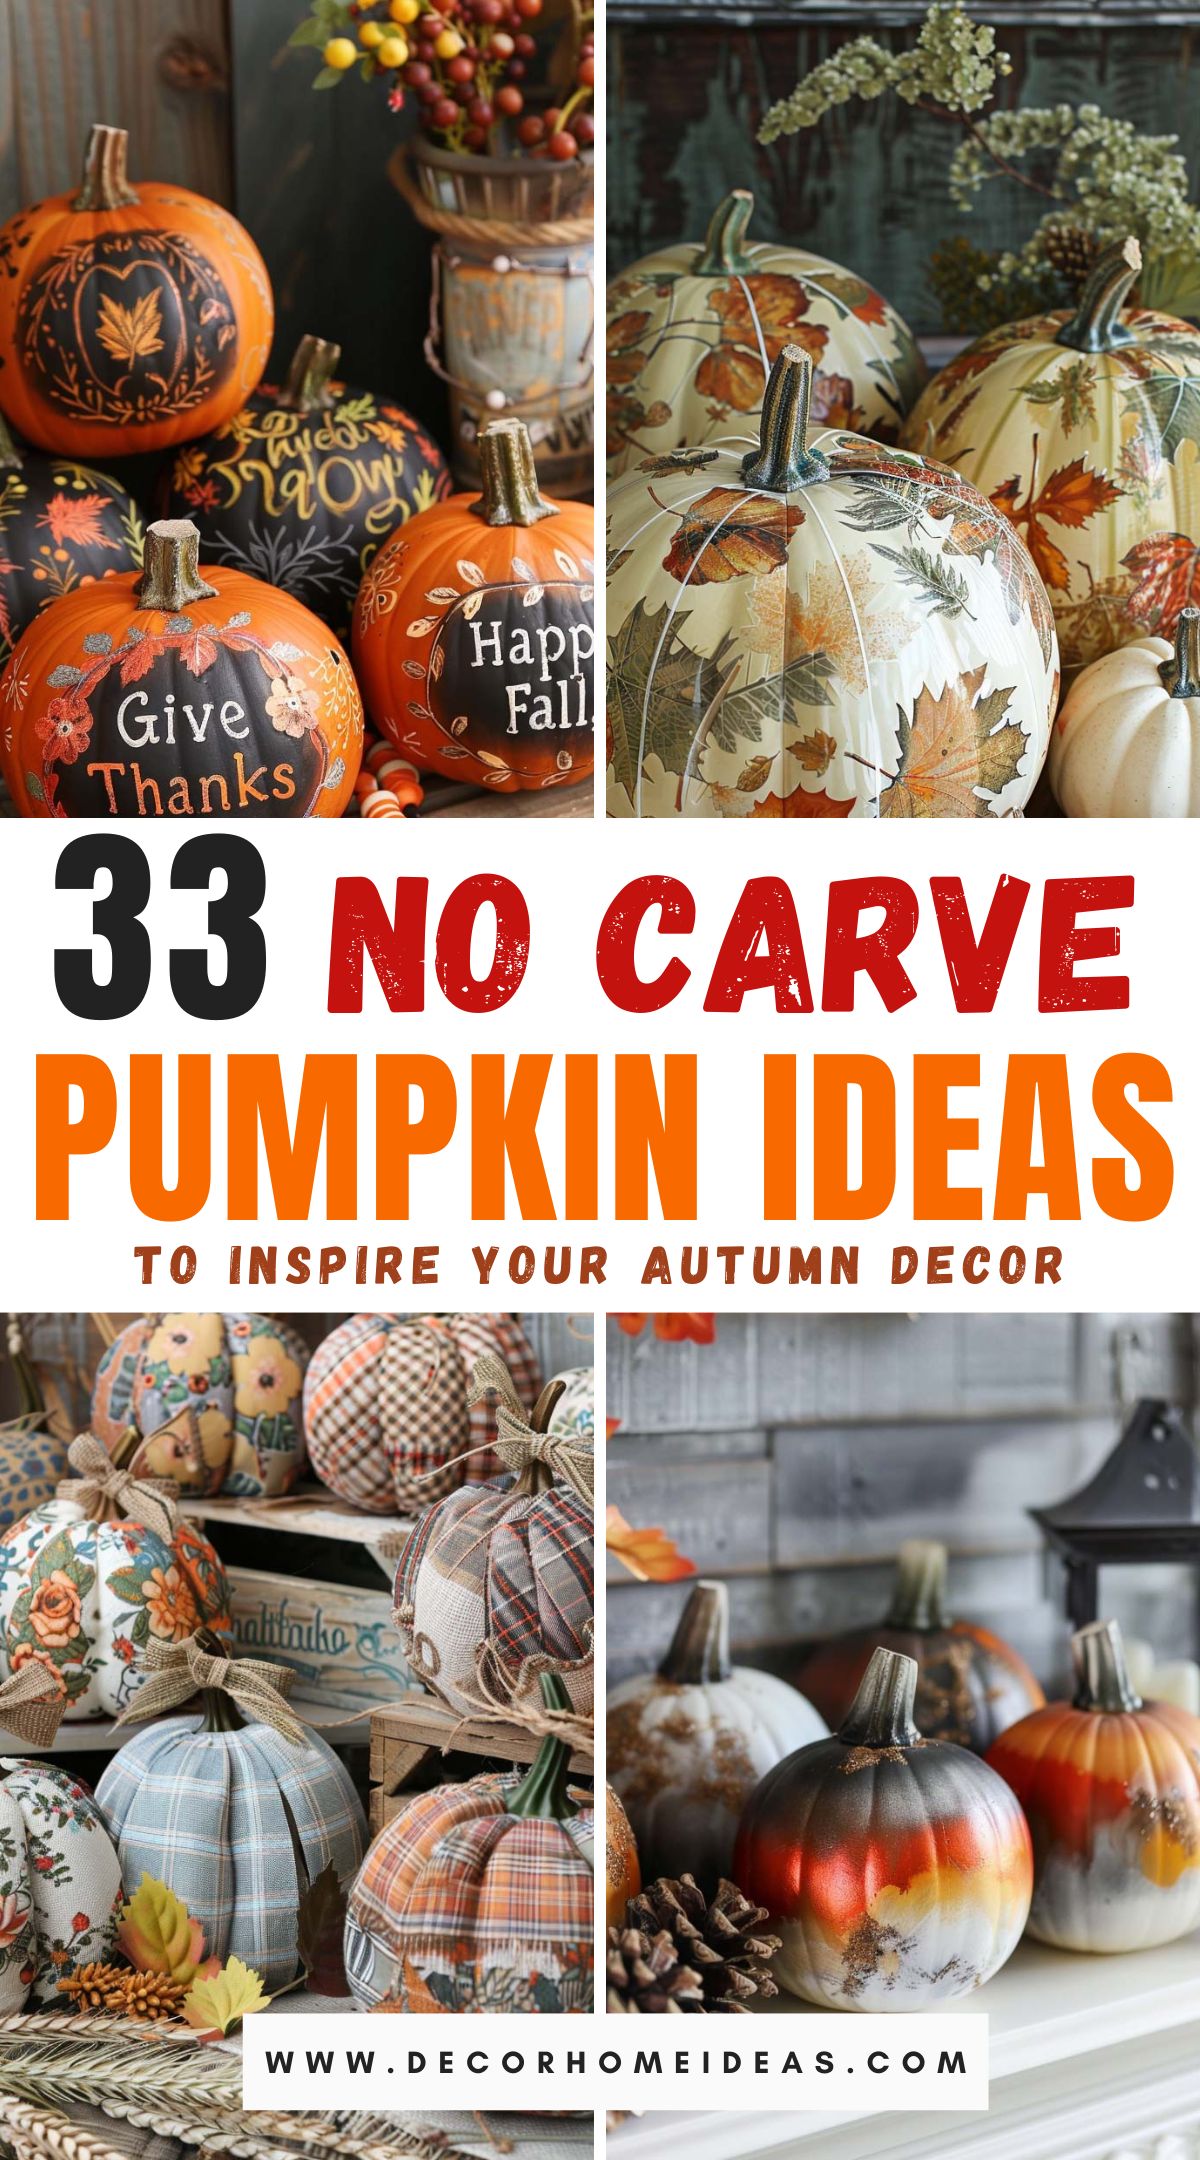 Discover the 30 best no-carve pumpkin ideas to add a creative touch to your fall decor. From painted masterpieces and decoupage designs to glittering gourds and fabric-wrapped pumpkins, these ideas offer endless inspiration for a fun and festive autumn without the mess of carving.